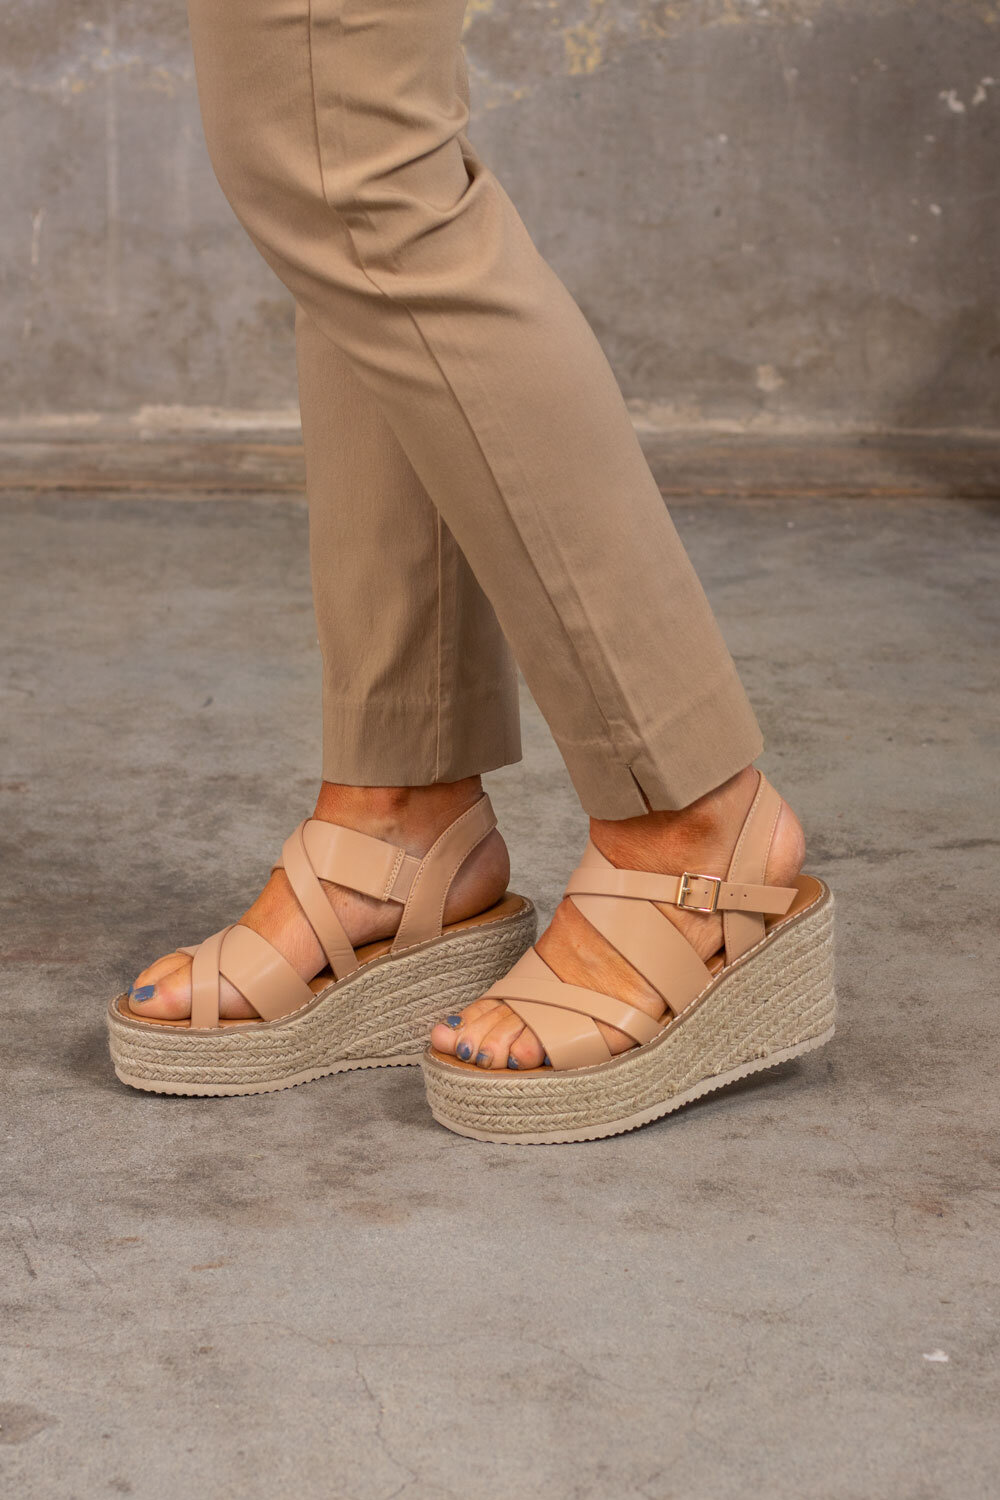 Sandals with Wedge Heel - Taupe